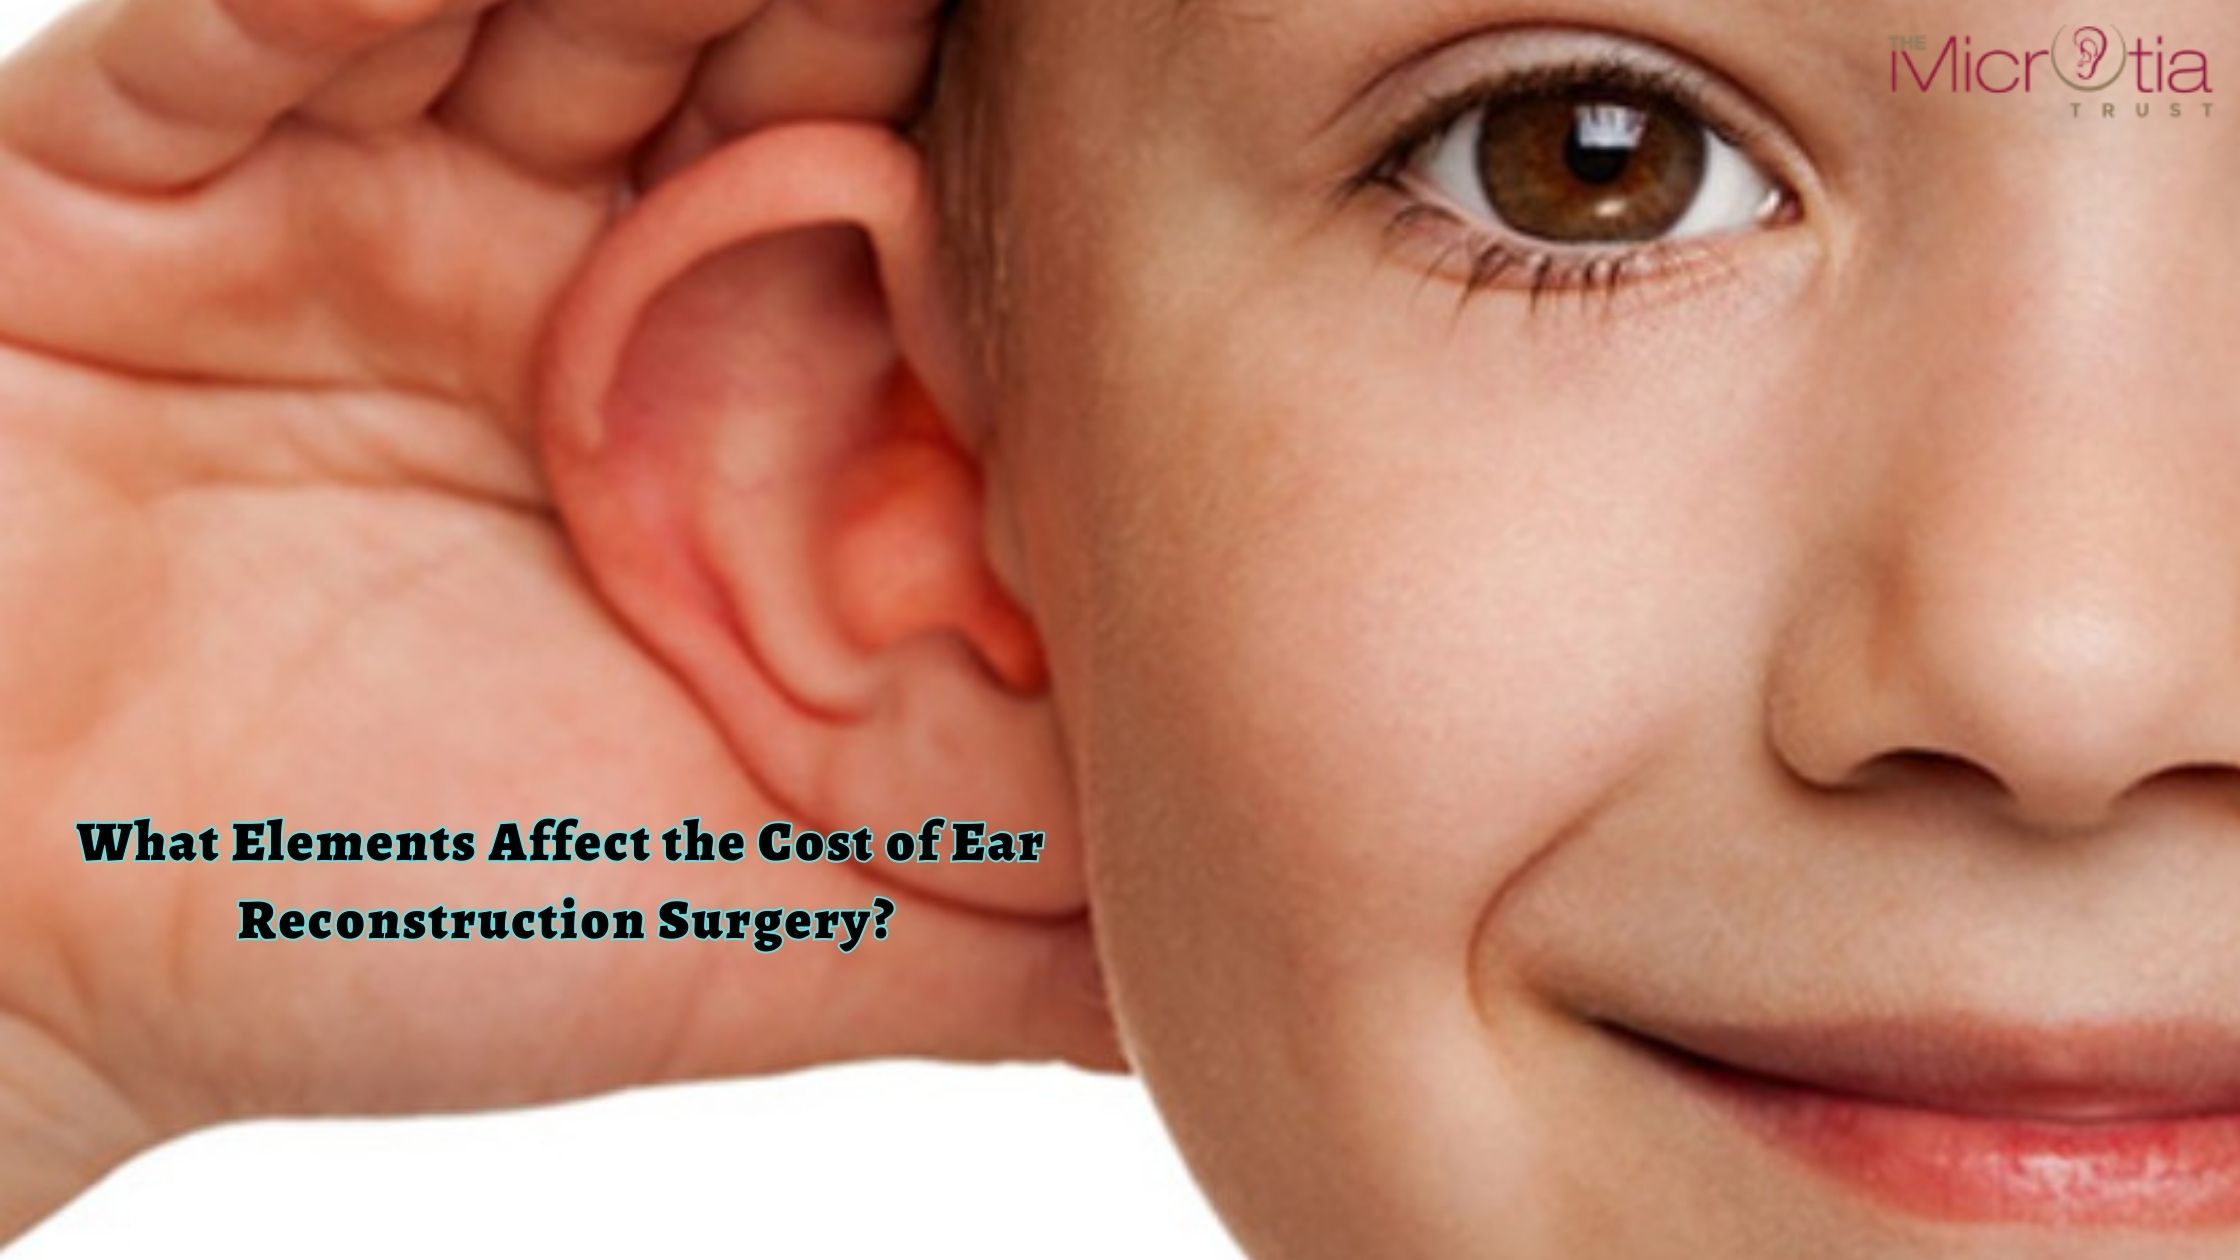 What Elements Affect the Cost of Ear Reconstruction Surgery